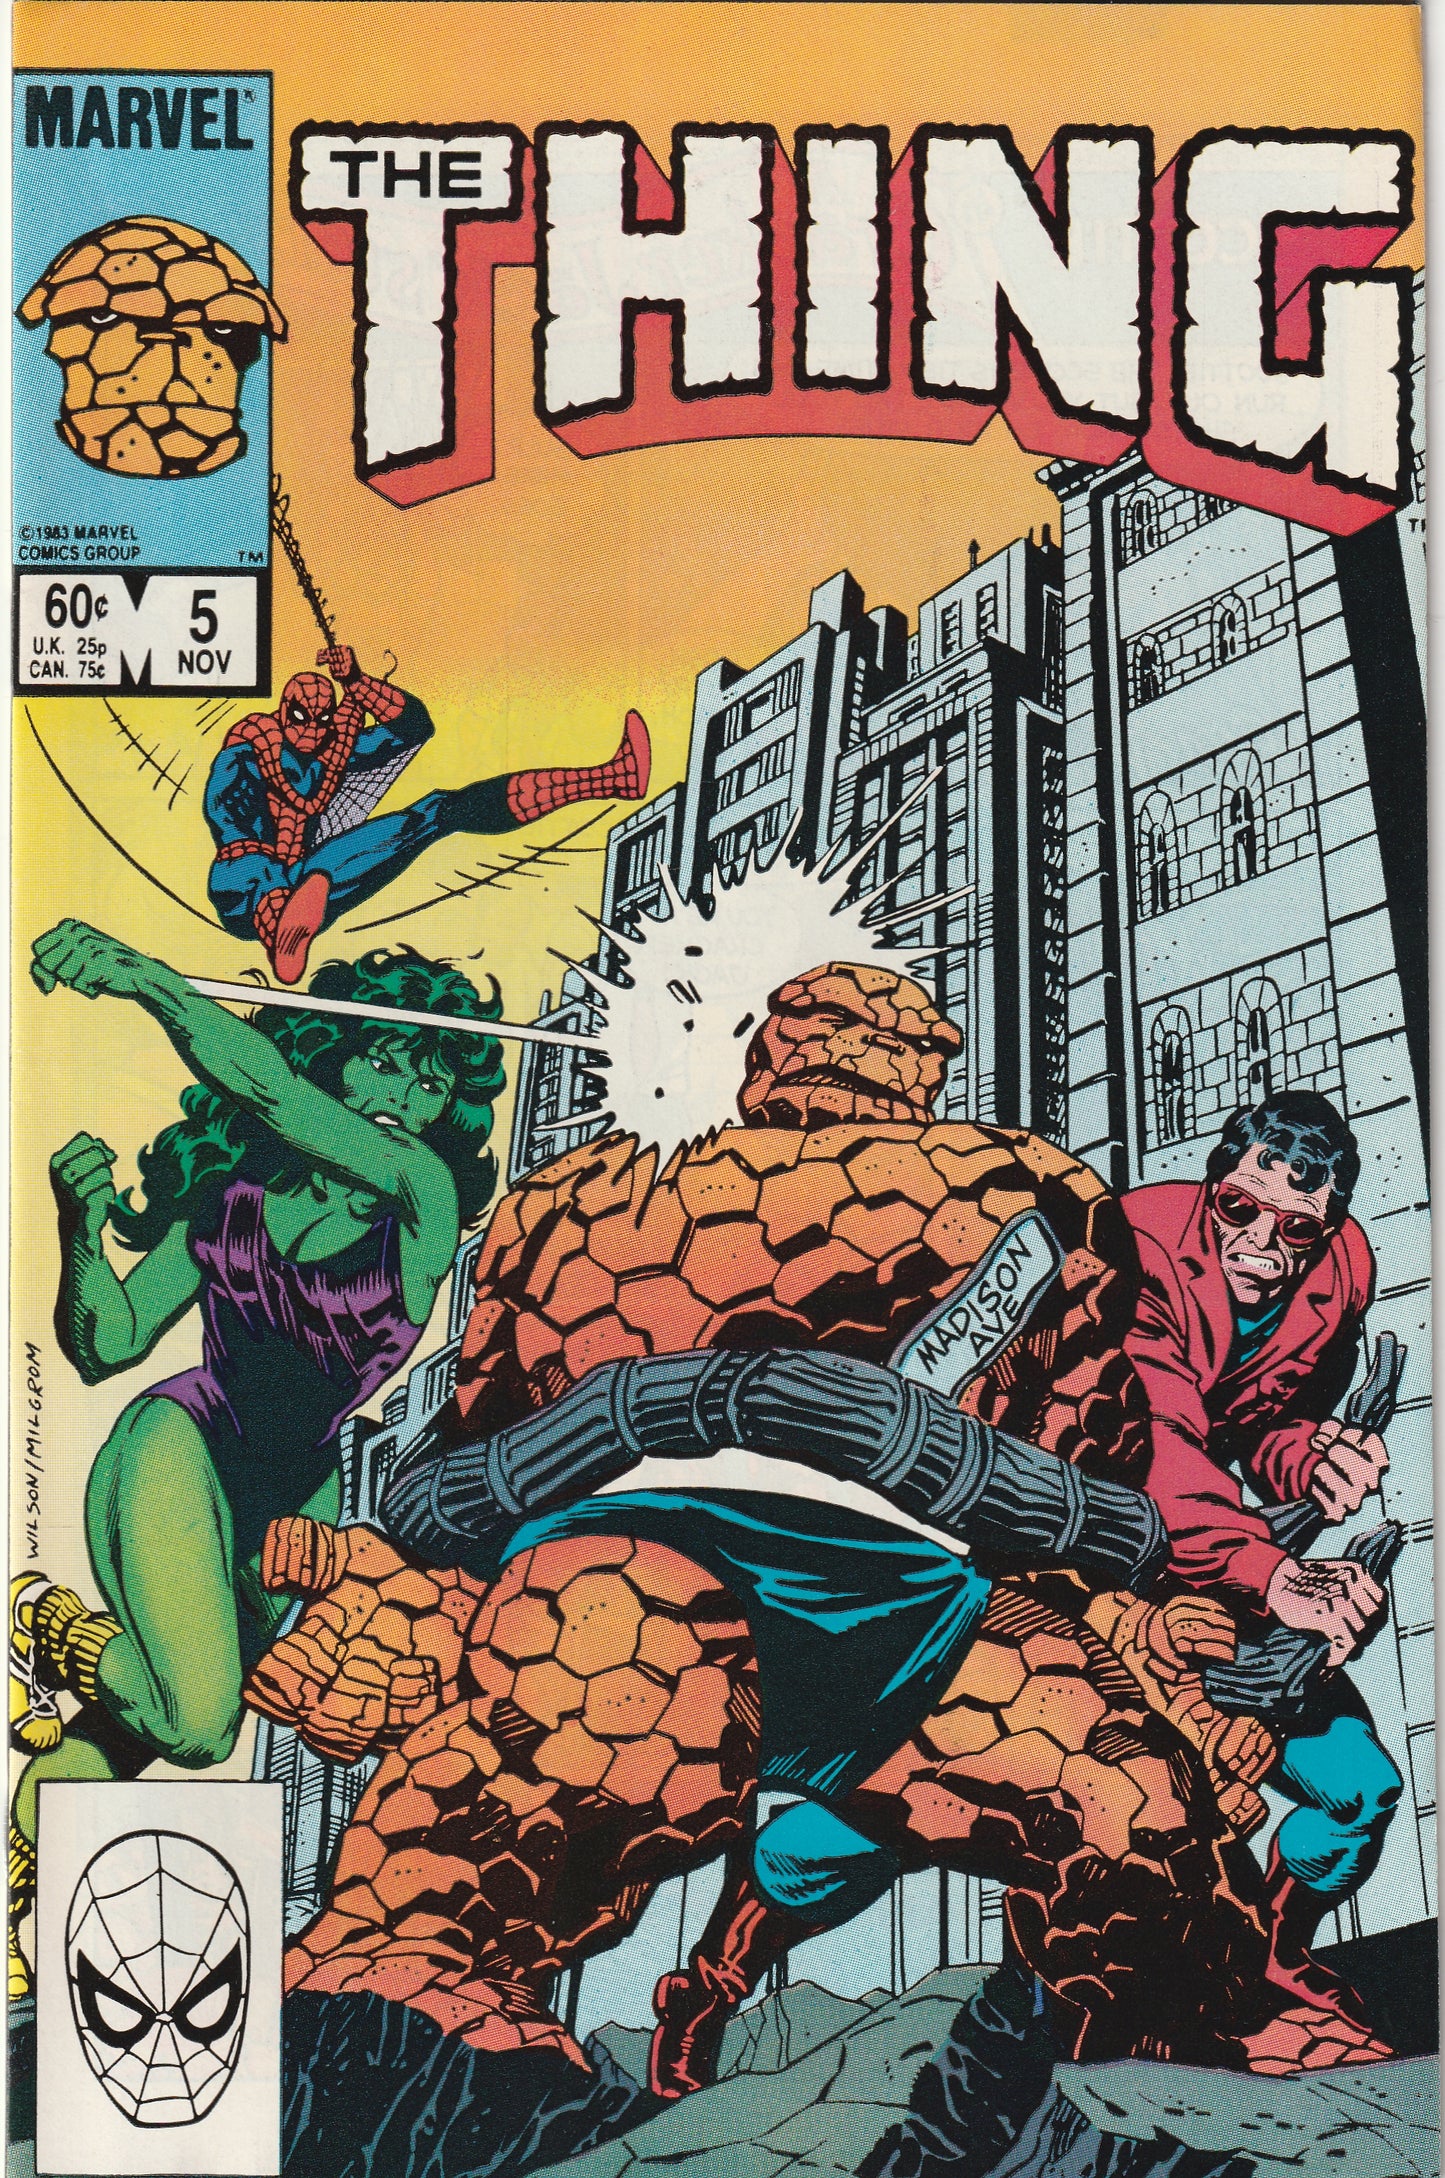 The Thing #5 (1983) - with Spider-Man & She-Hulk